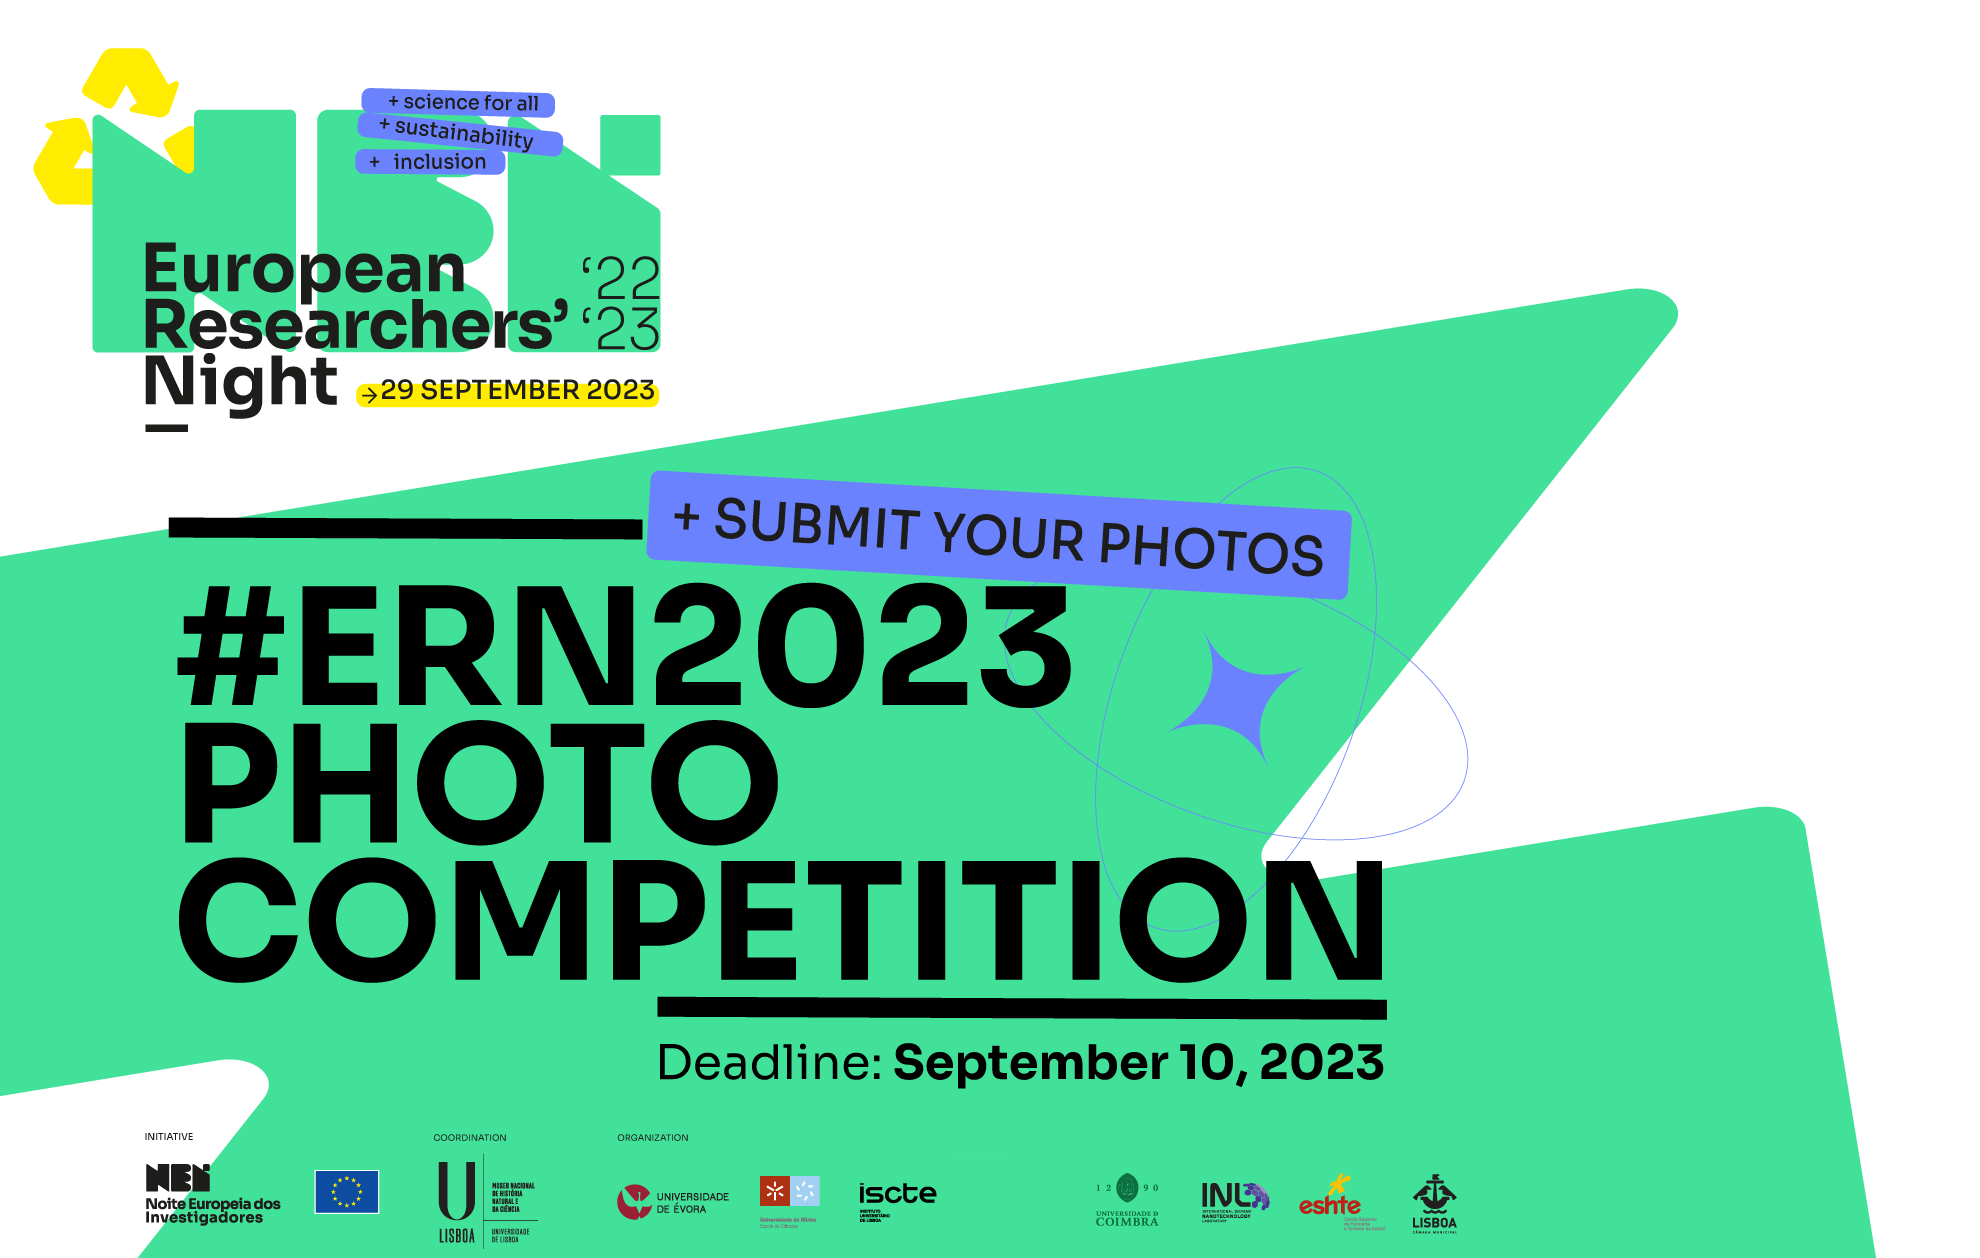 #ERN2023 Photo Competition is now open!